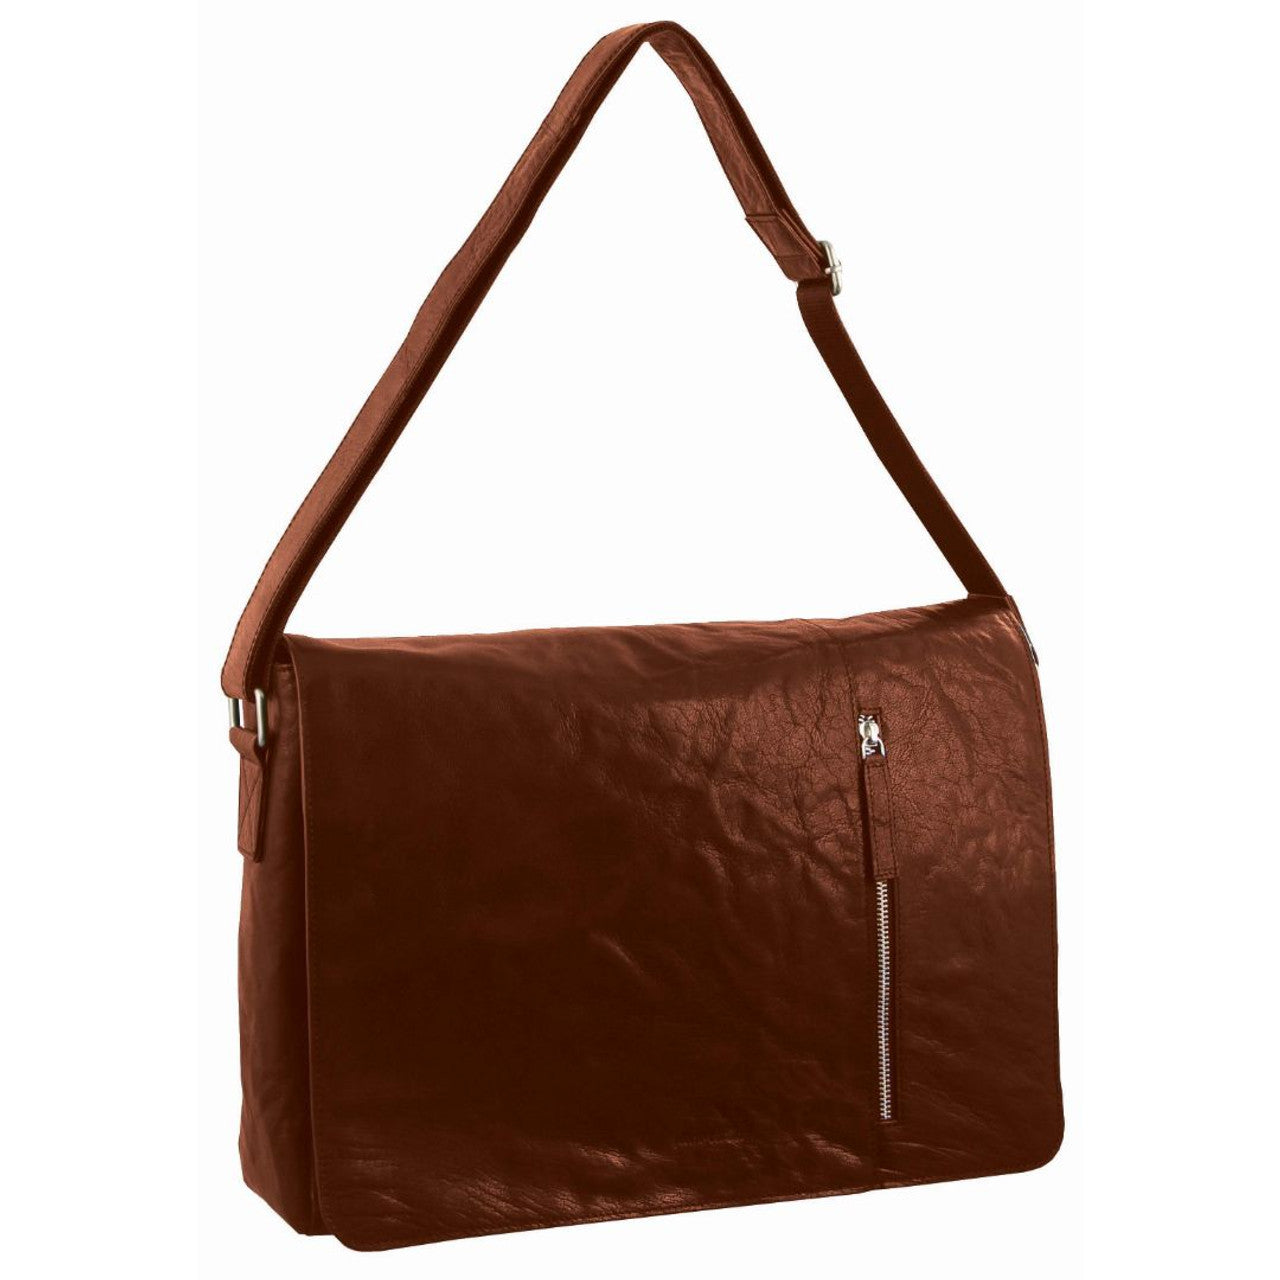 Pierre Cardin Rustic Leather Computer/Messenger Bag with flap closure-1